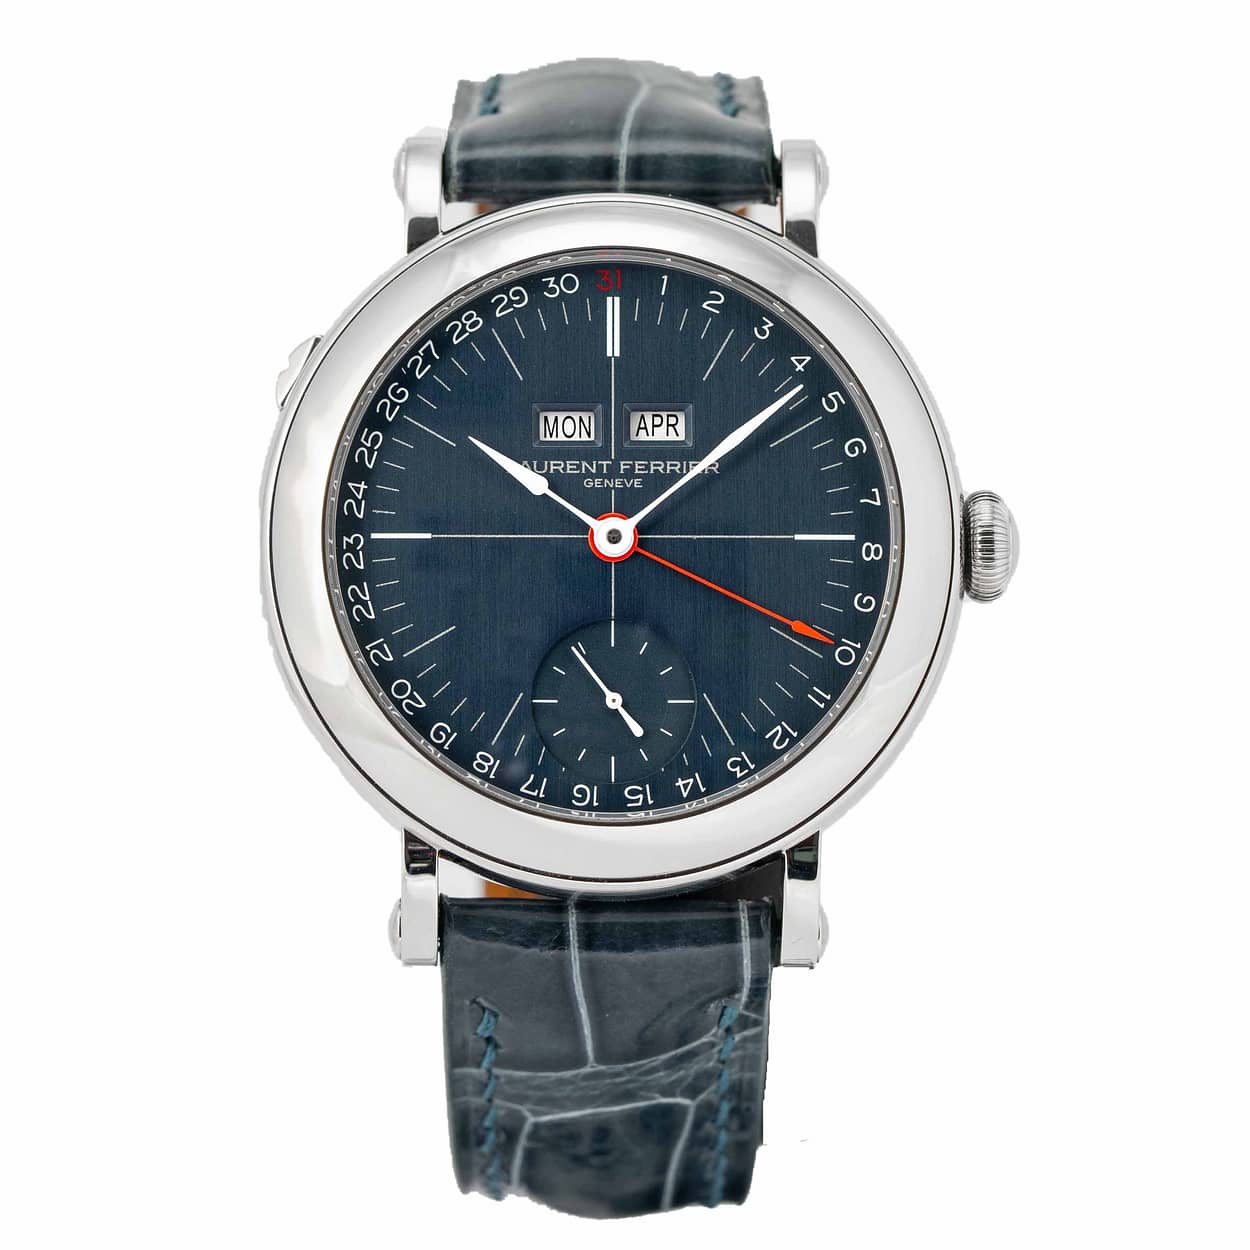 Buy Laurent Ferrier Classic Micro-Rotor Ice Blue Dial - K2 Luxury Watches